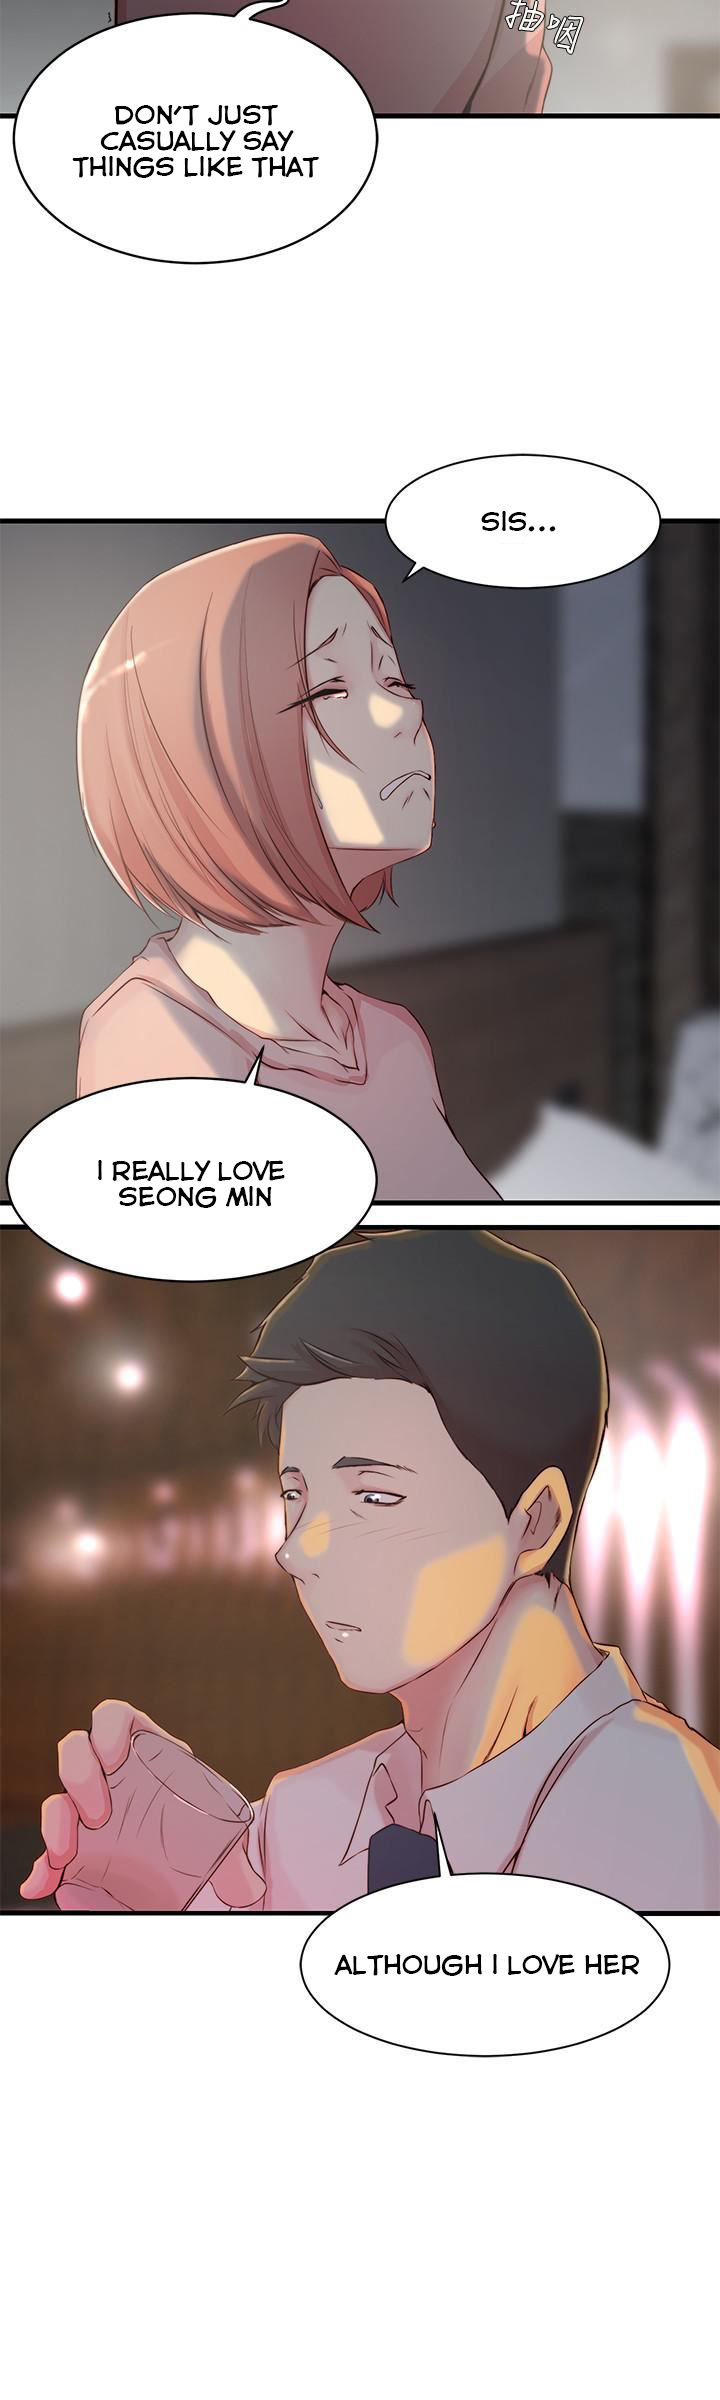 Sister In Law (Kim Jol Gu) - Chapter 5 Page 10